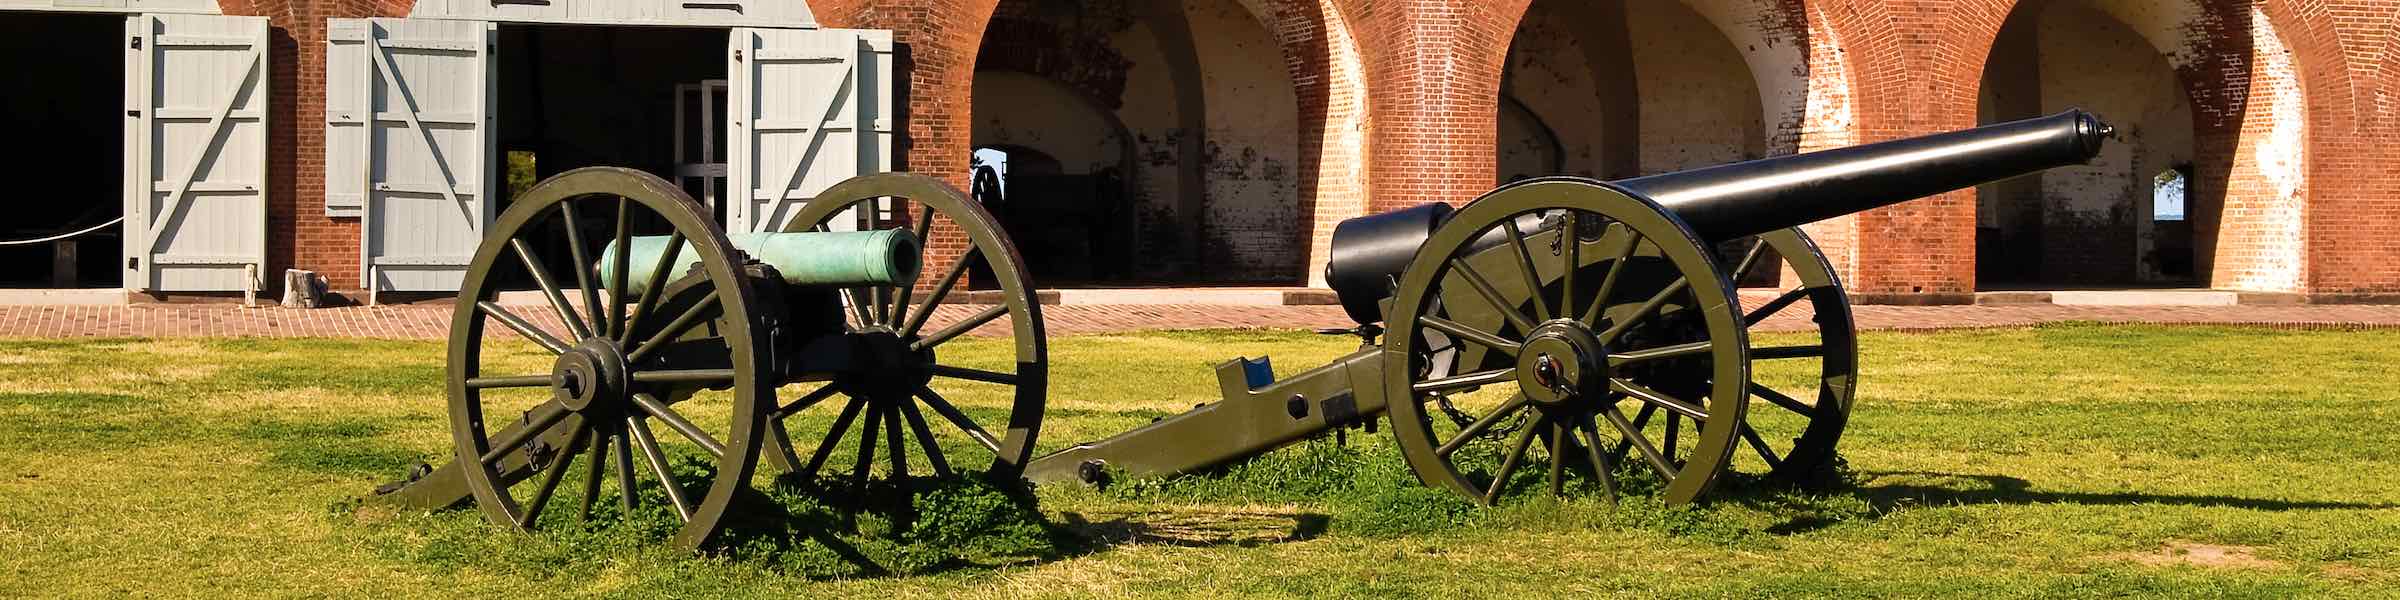 Cannons inside the fortification at Fort Pulaski, Georgia.